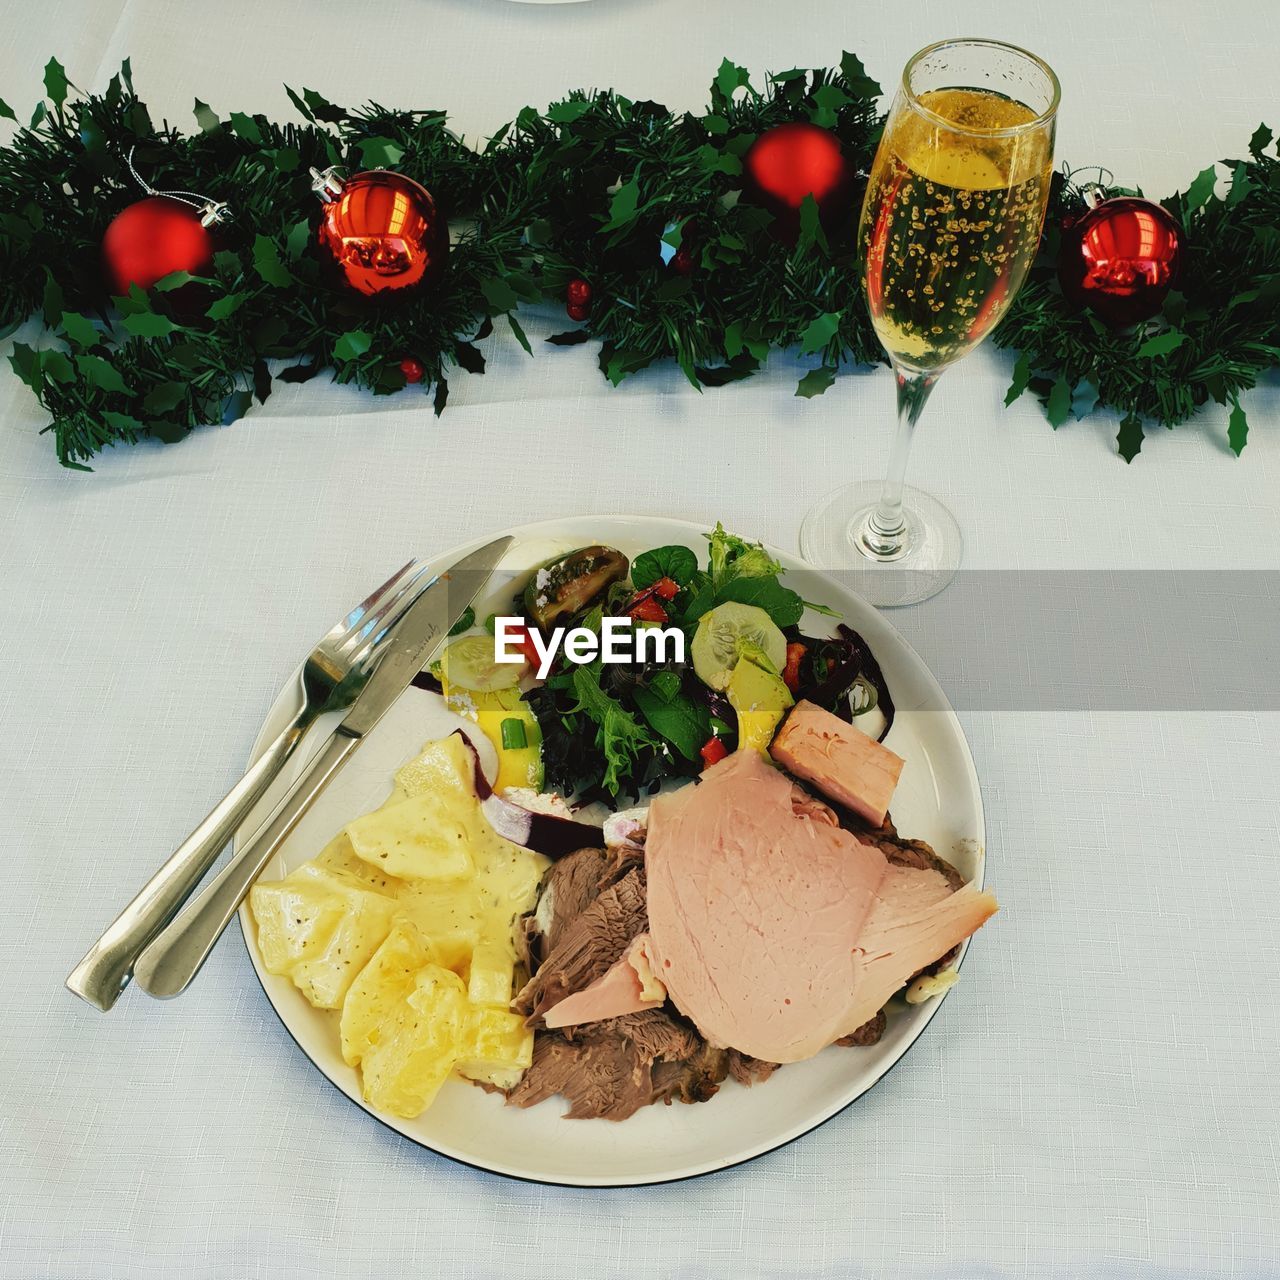 Here we have a traditional aussie christmas dinner with a glass of bubbly. 